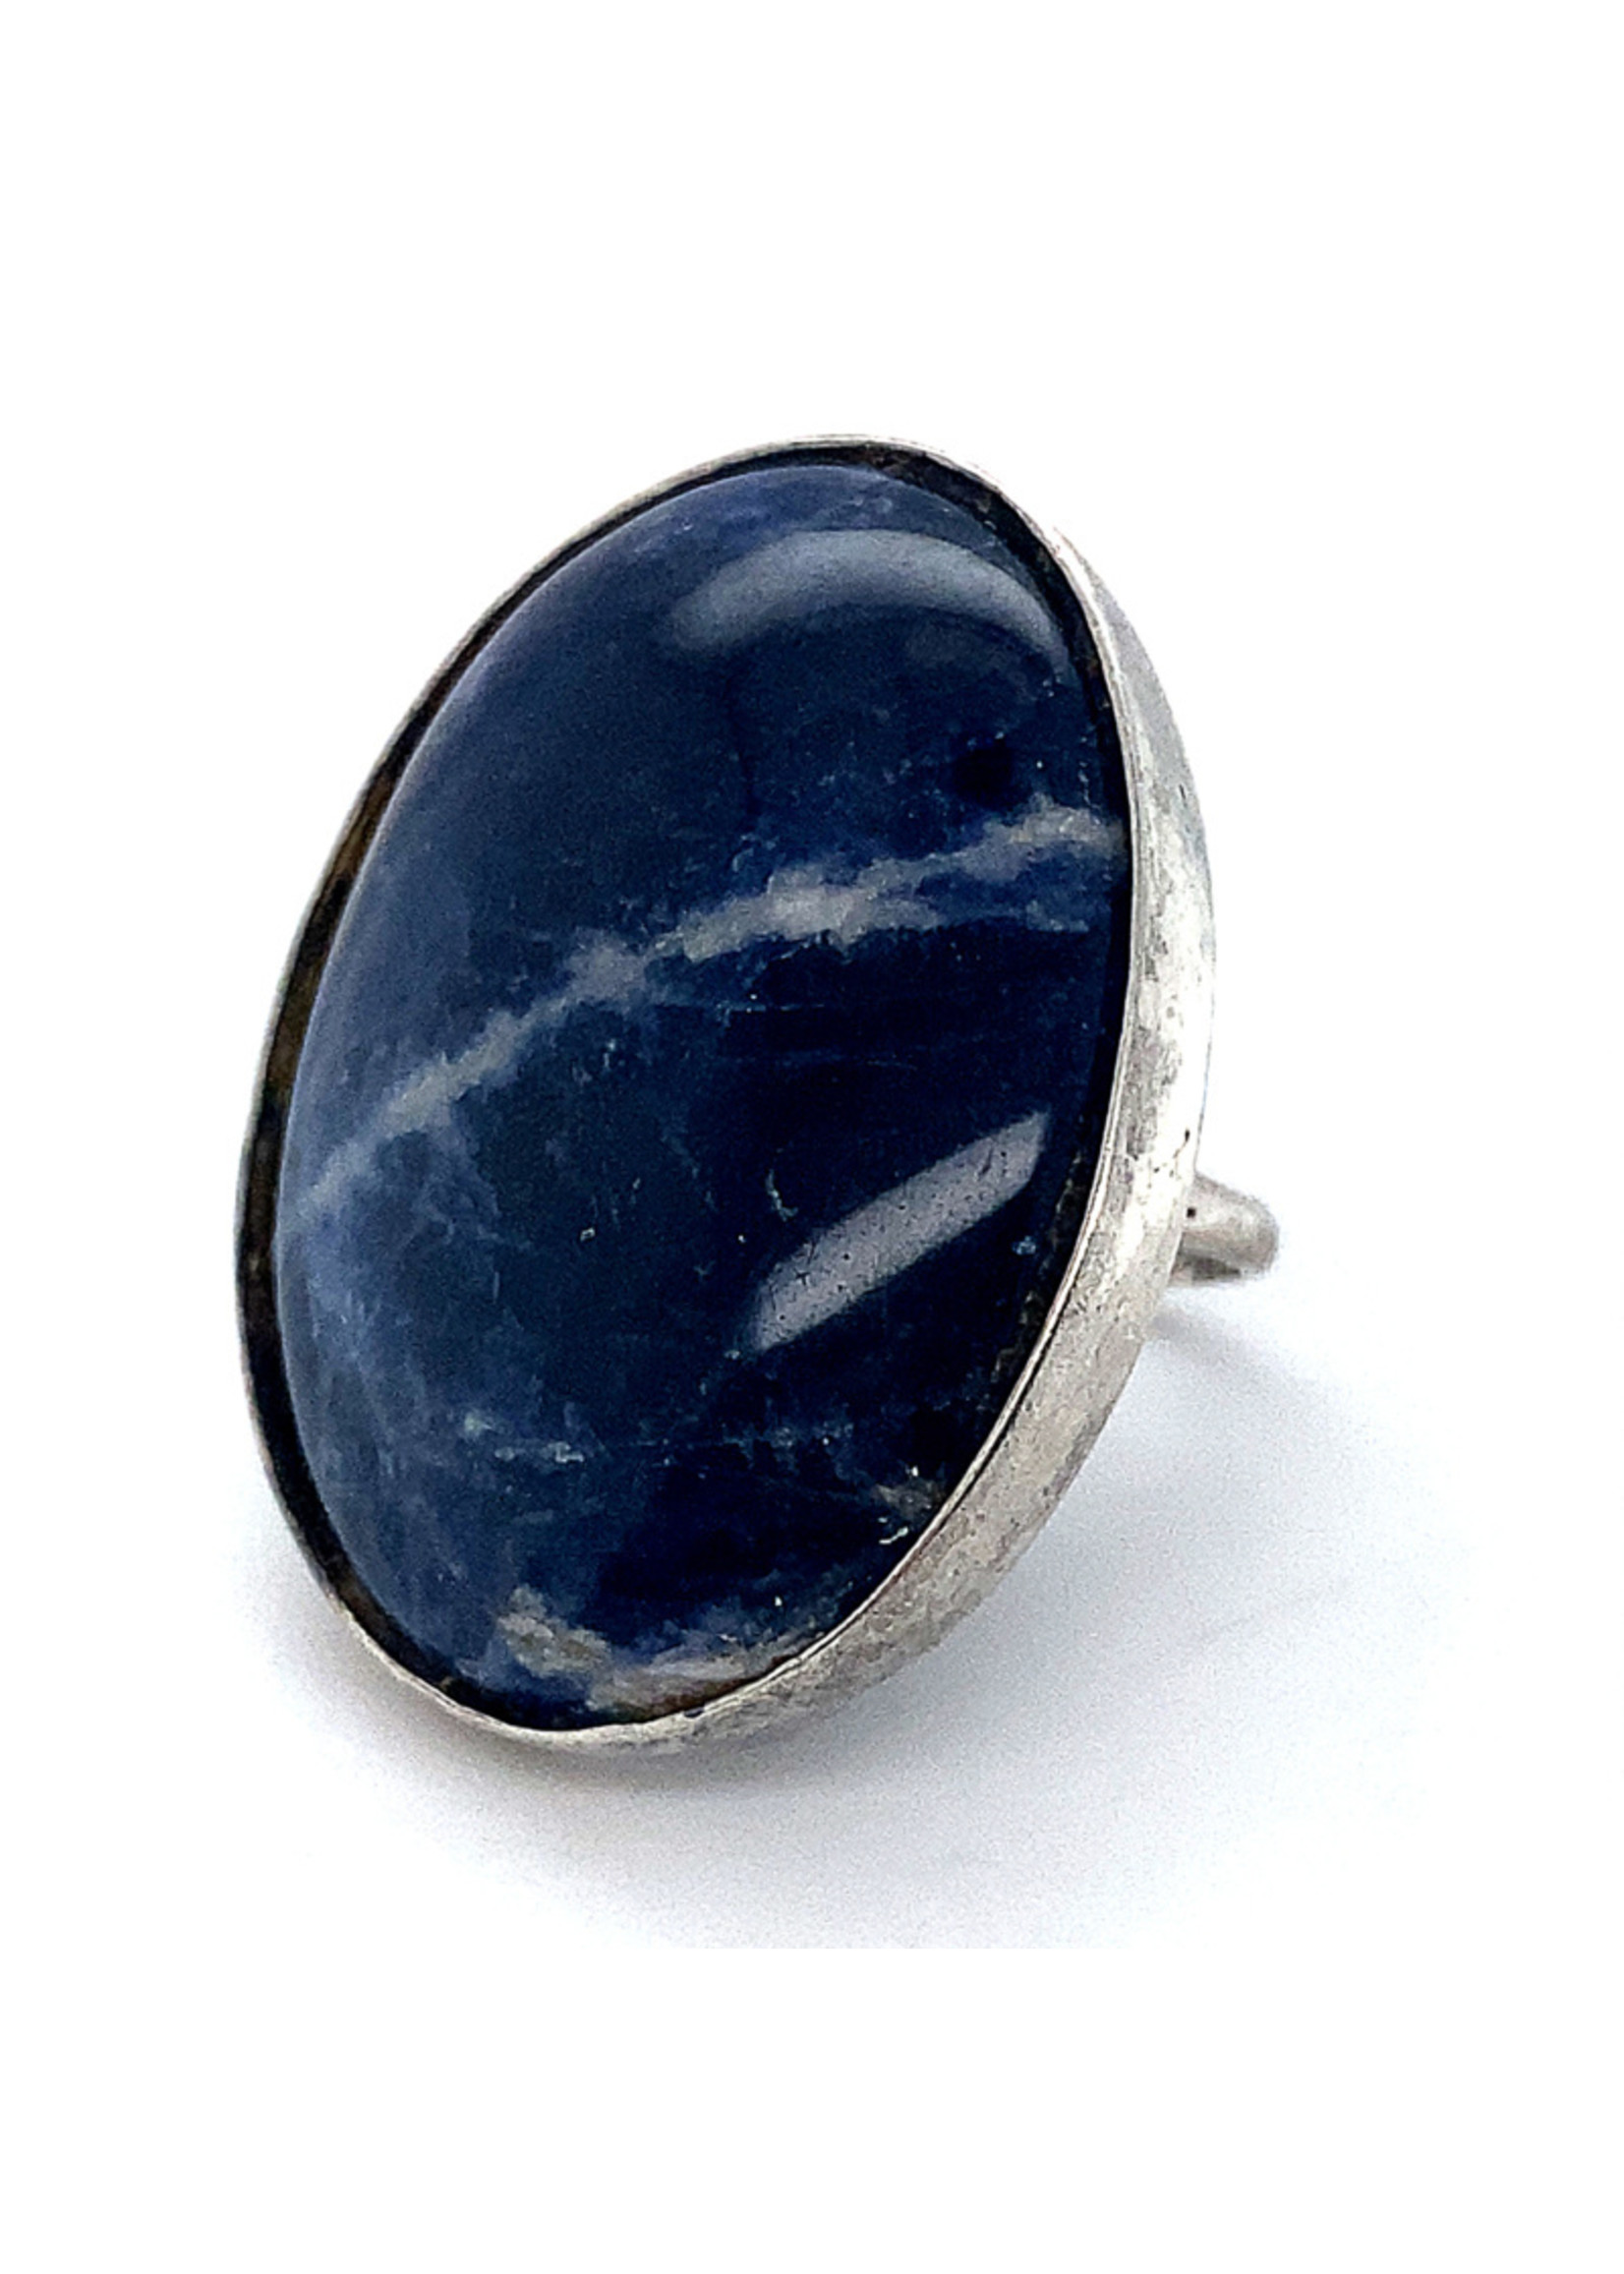 Vintage & Occasion Occasion ring met grote donkerblauwe sodaliet